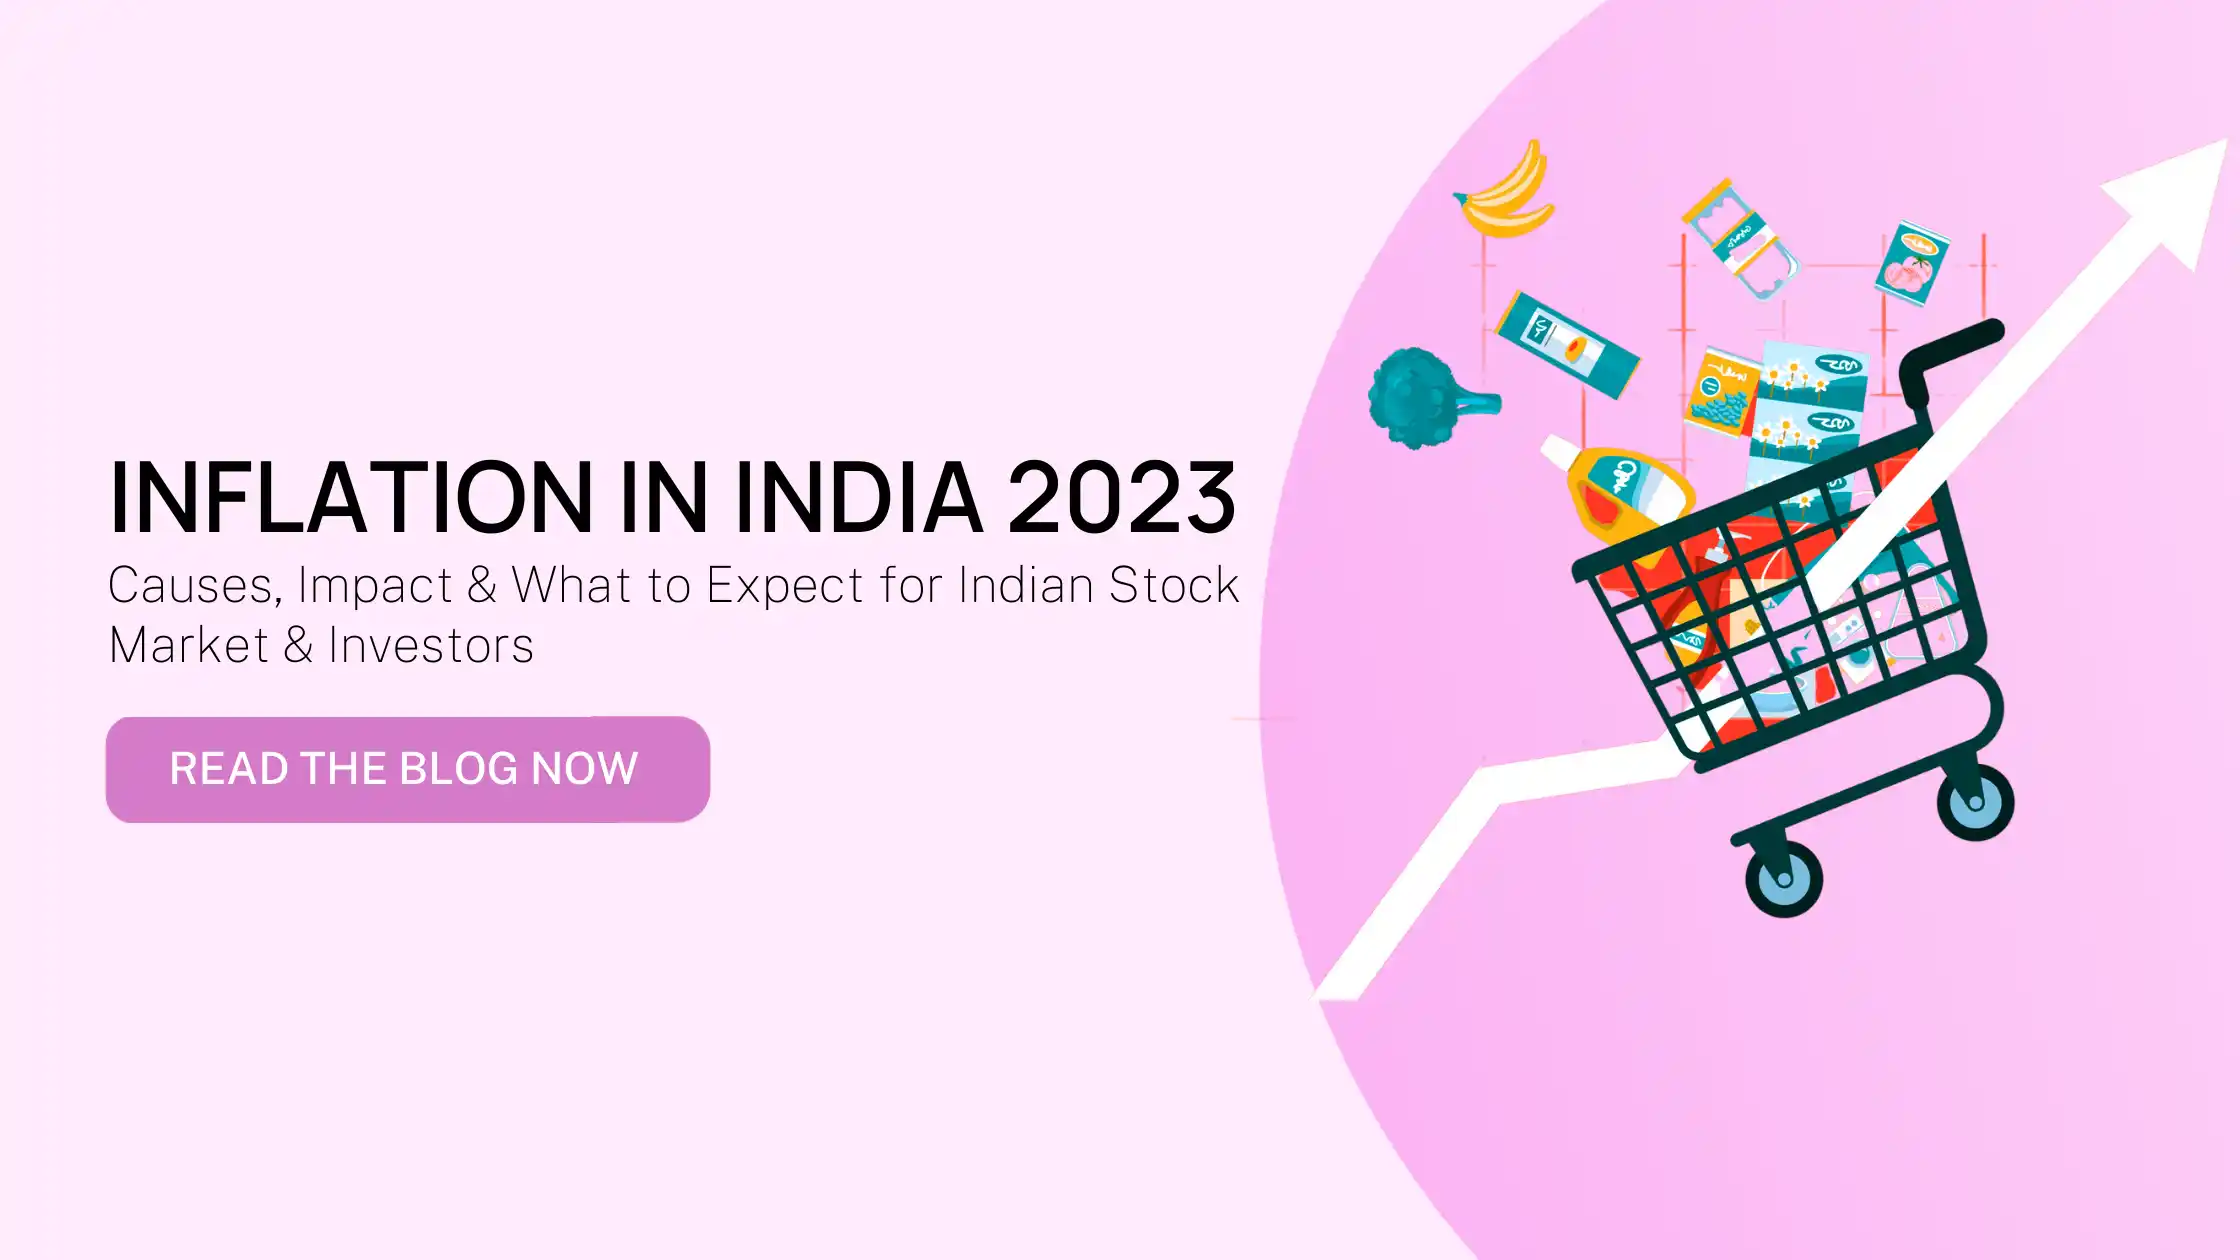 Inflation in India 2023 - Causes, Impact & What to Expect for Indian Stock Market & Investors